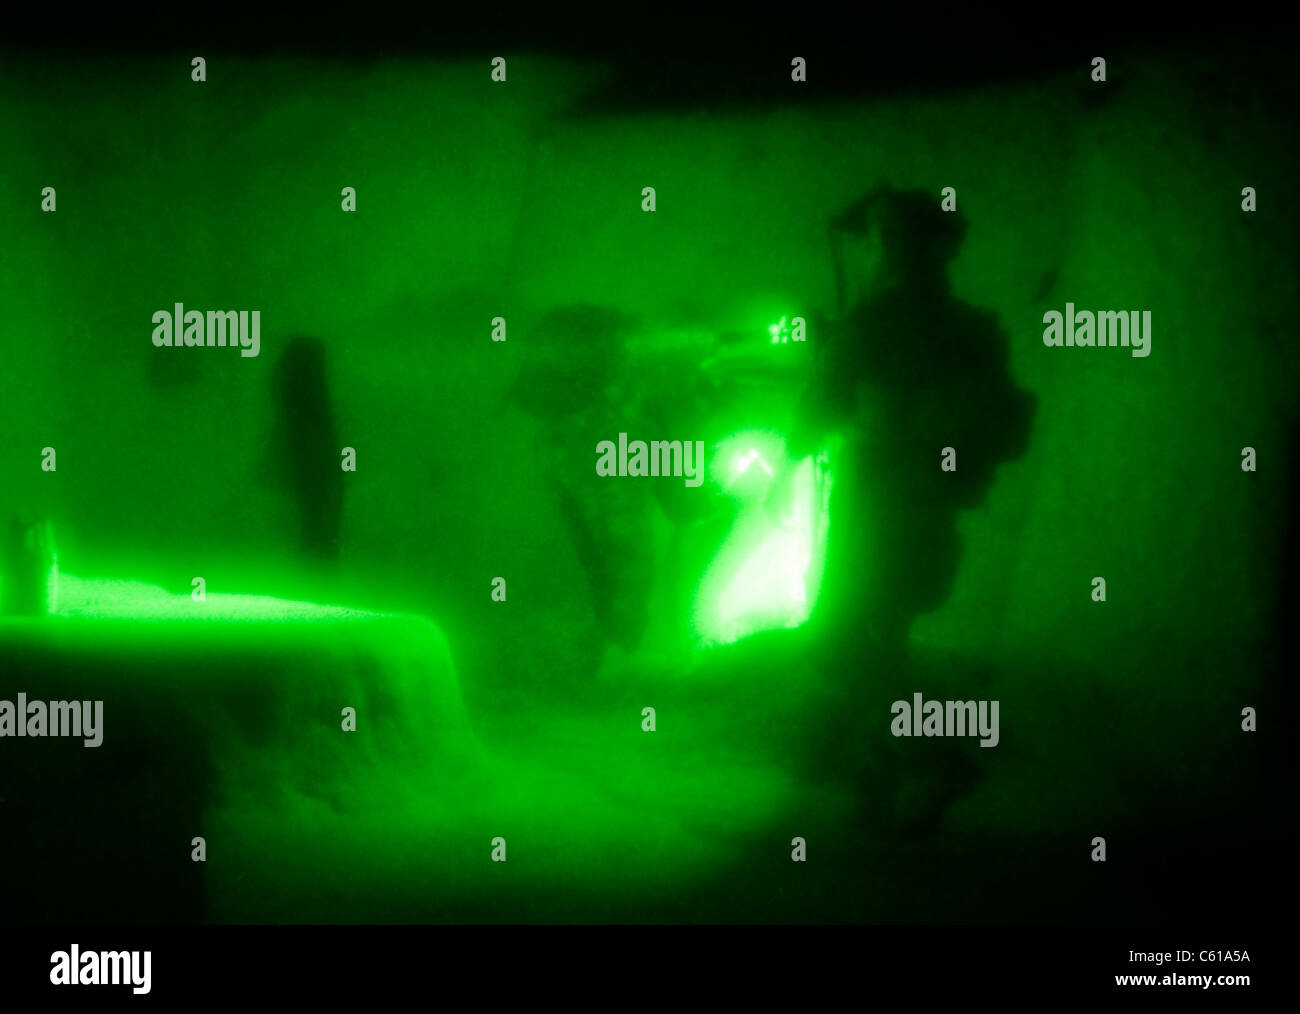 A U.S. Navy SEAL and an Afghan commando utilize flashlights while searching a compound during a village clearing operation in Shah Wali Kot district, Kandahar province, Afghanistan, June 7, 2011. Operations such as these are conducted in order to deny Taliban influence and promote the Government of Afghanistan, while providing security and stability throughout the province. The SEALs are with Special Operations Task Force - South, and the commandos are with the Afghan national army?s 3rd Commando Kandak. (U.S. Army photo by Sgt. Daniel P. Shook/Released) Stock Photo